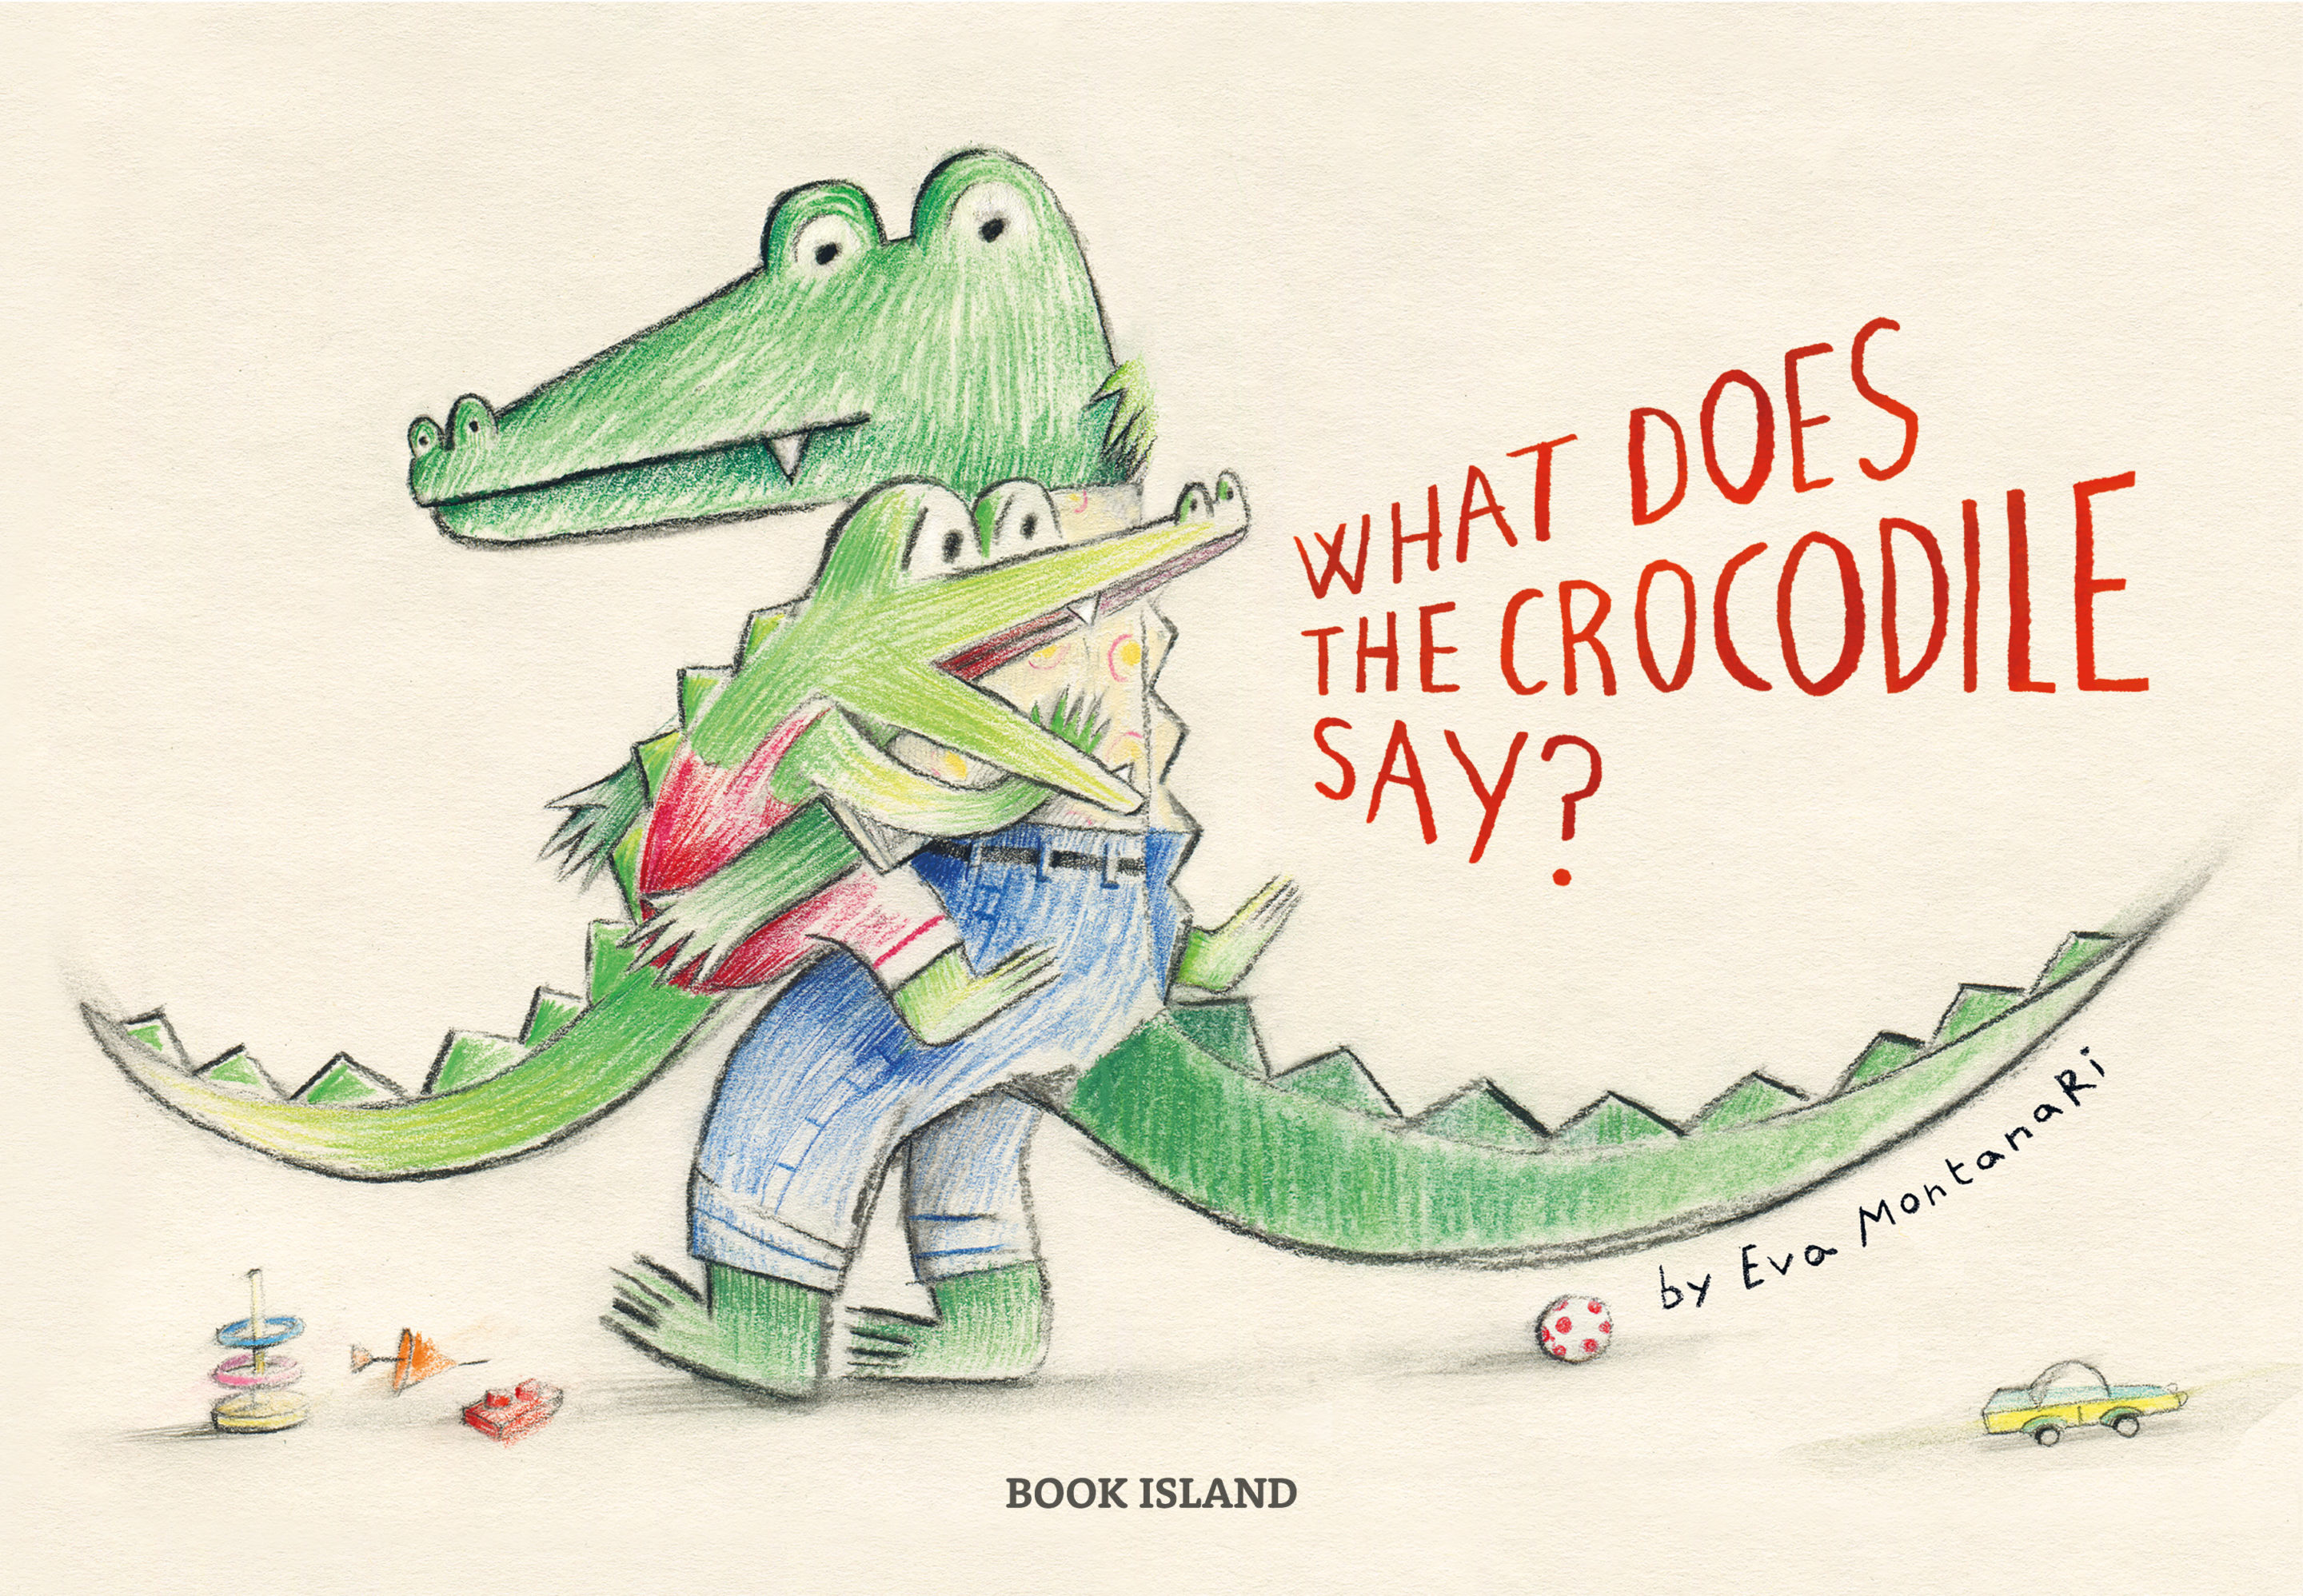 What does the crocodile say?